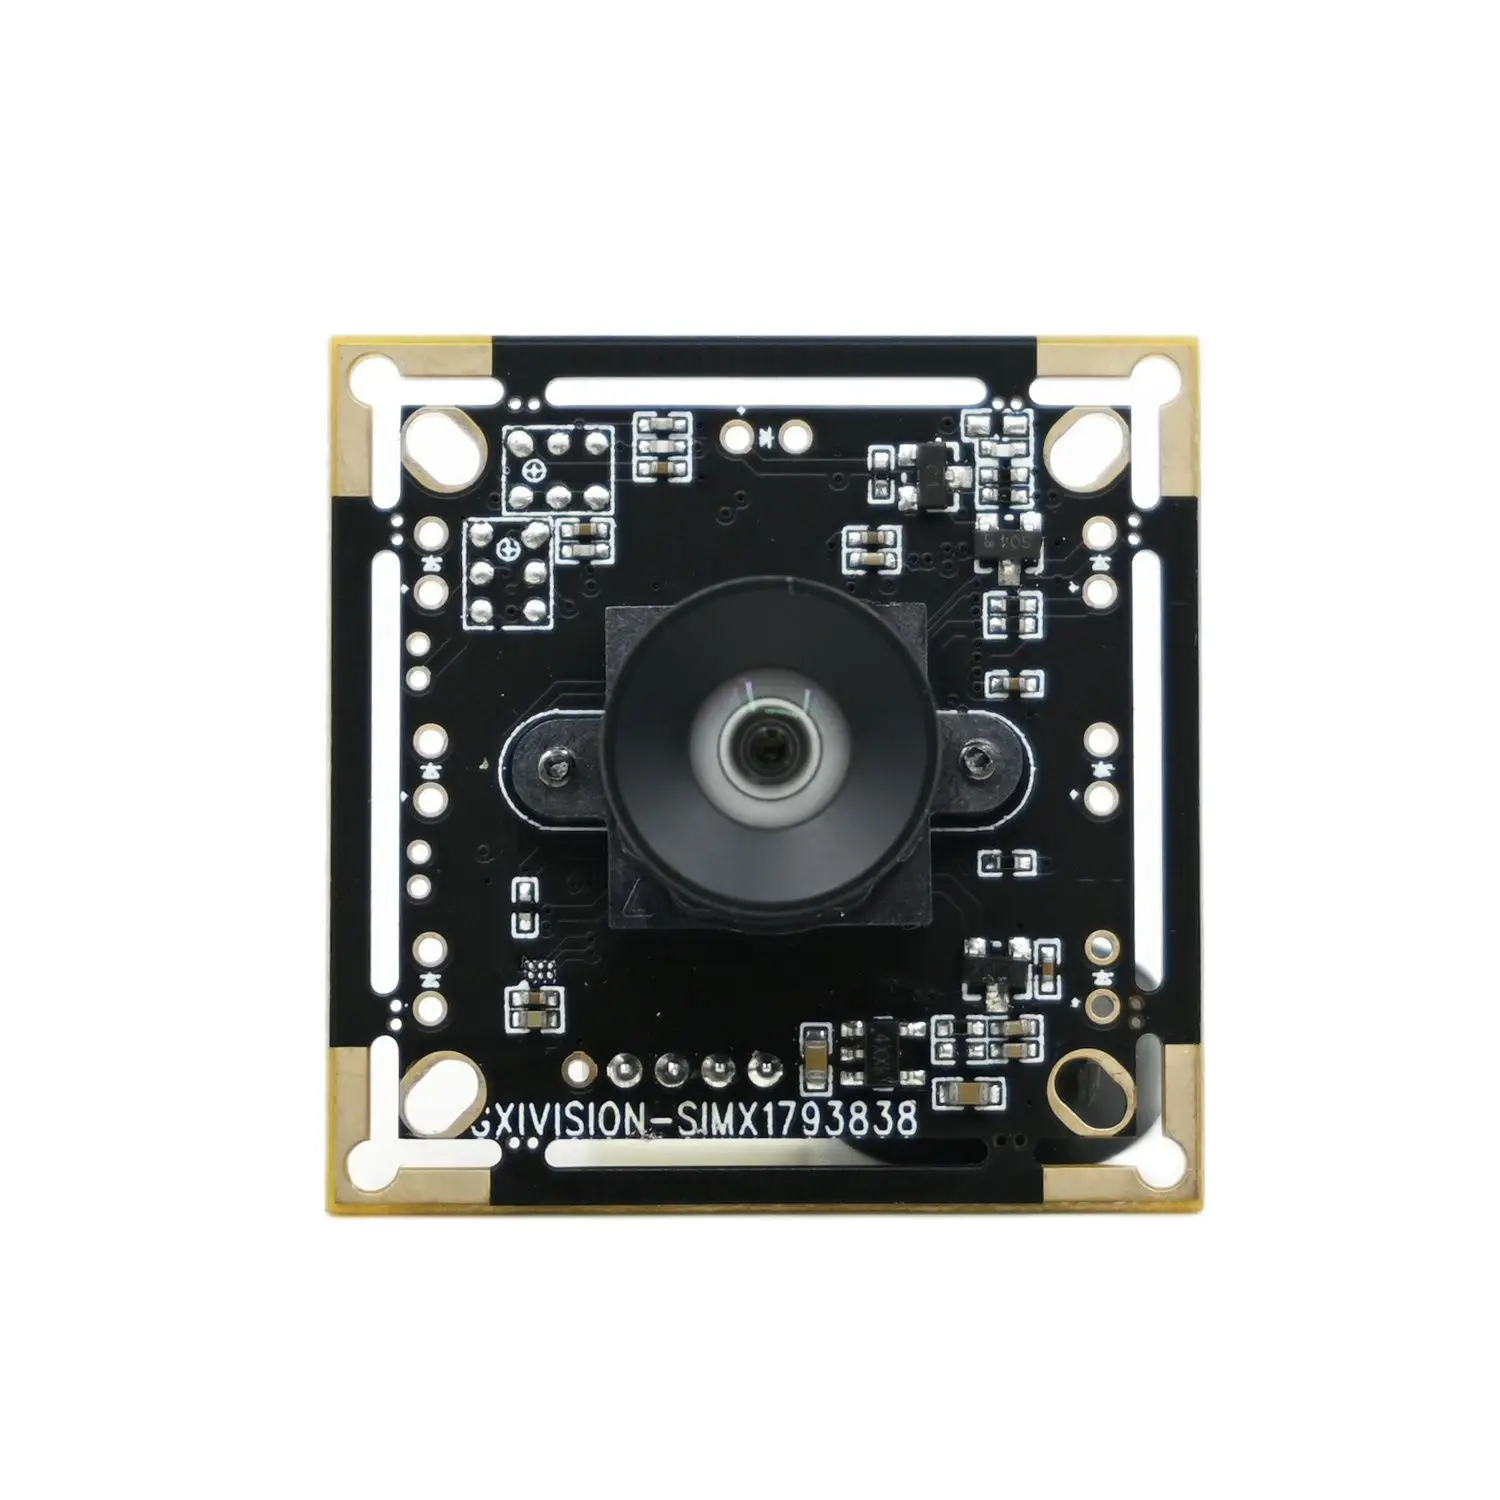 USB Camera Module 8MP HD IMX179 CMOS Fixed Focus Static High-Speed Shooting Conventional Industrial Application 3264x2448 15fps images - 6